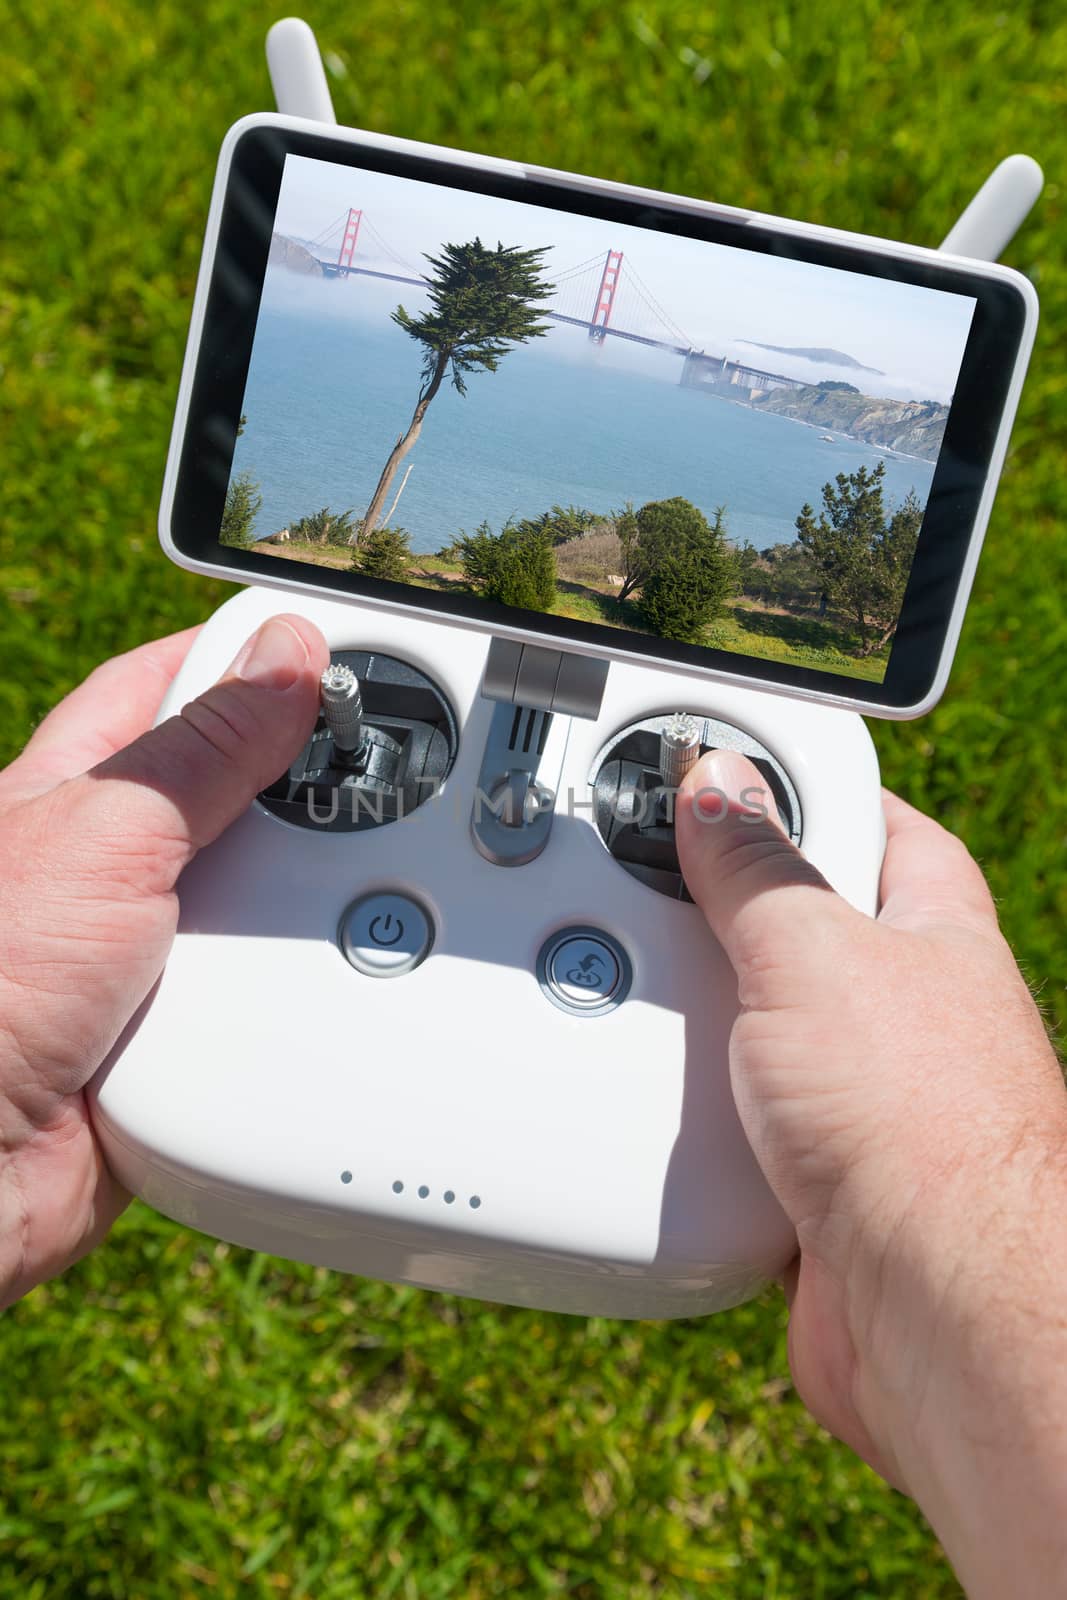 Hands Holding Drone Quadcopter Controller With Golden Gate Bridge View on Screen. by Feverpitched